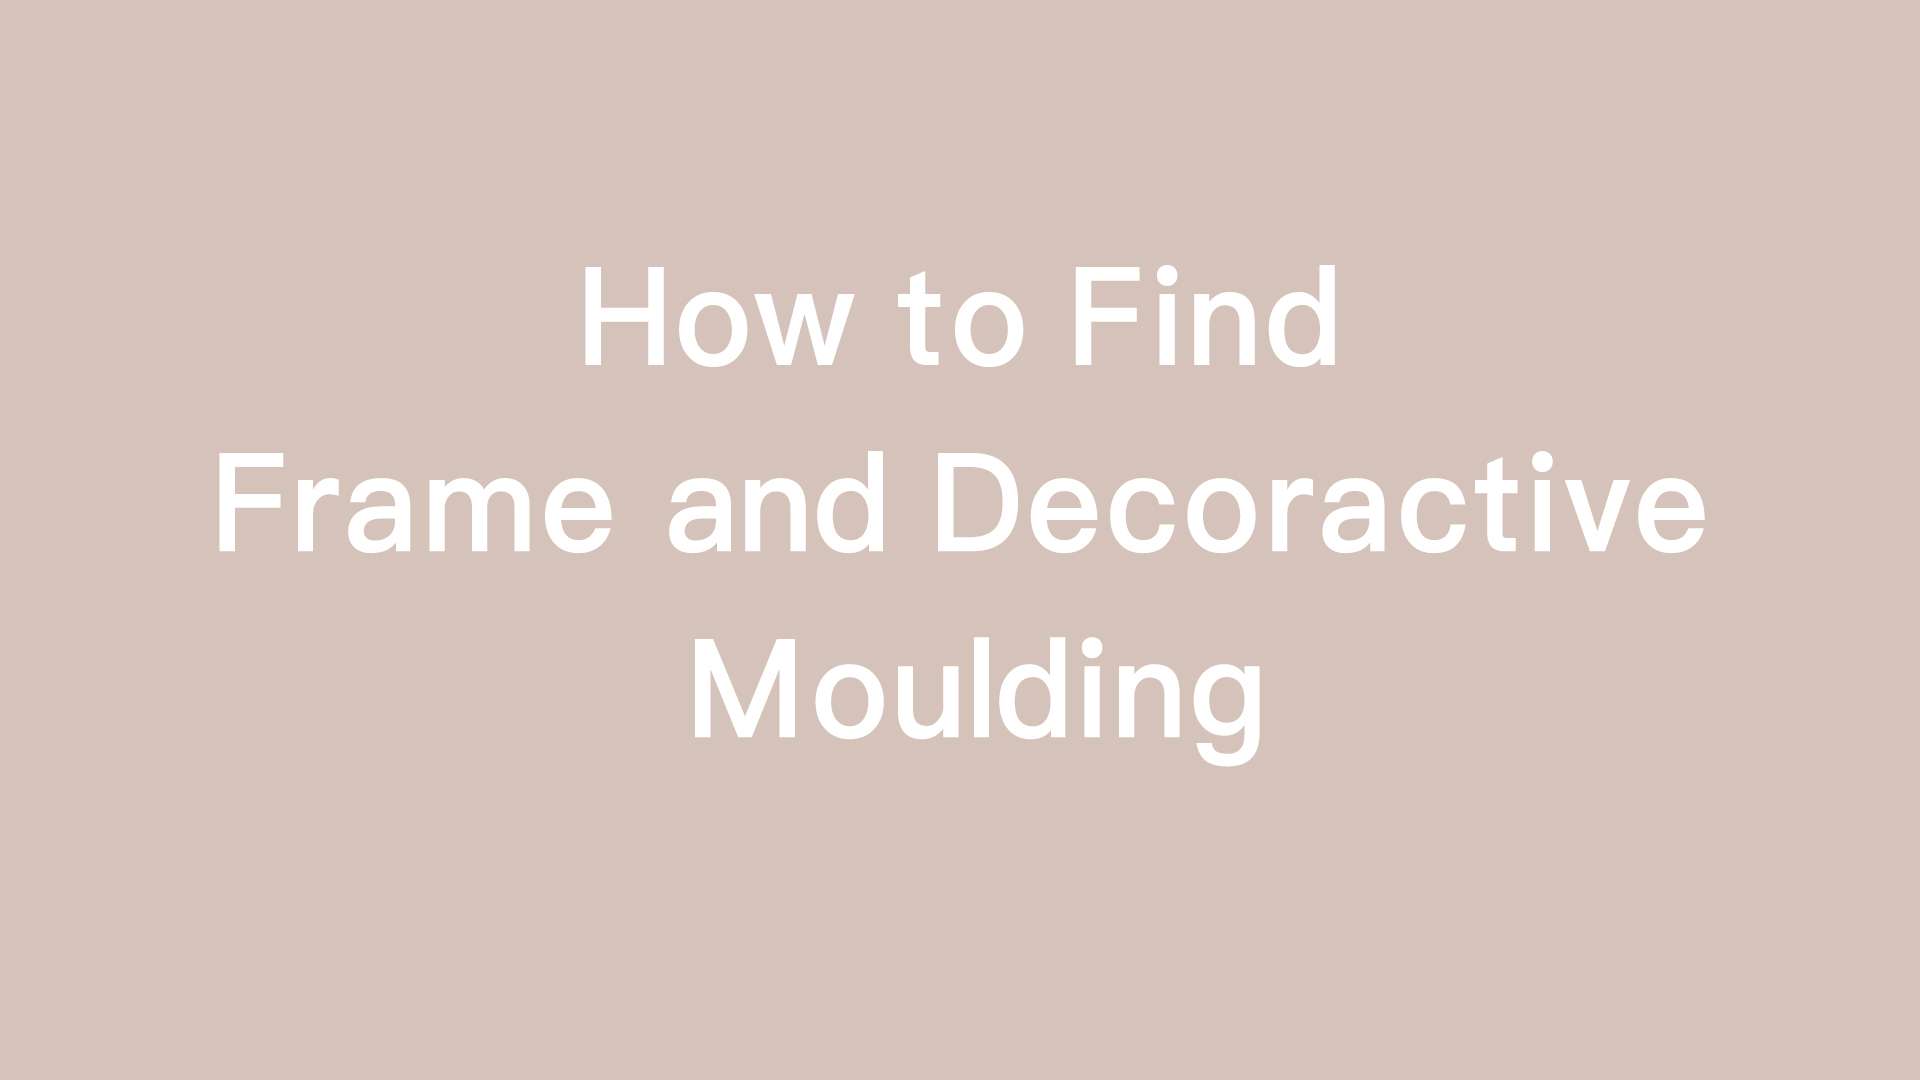 How to Find Frame and Decoractive Moulding